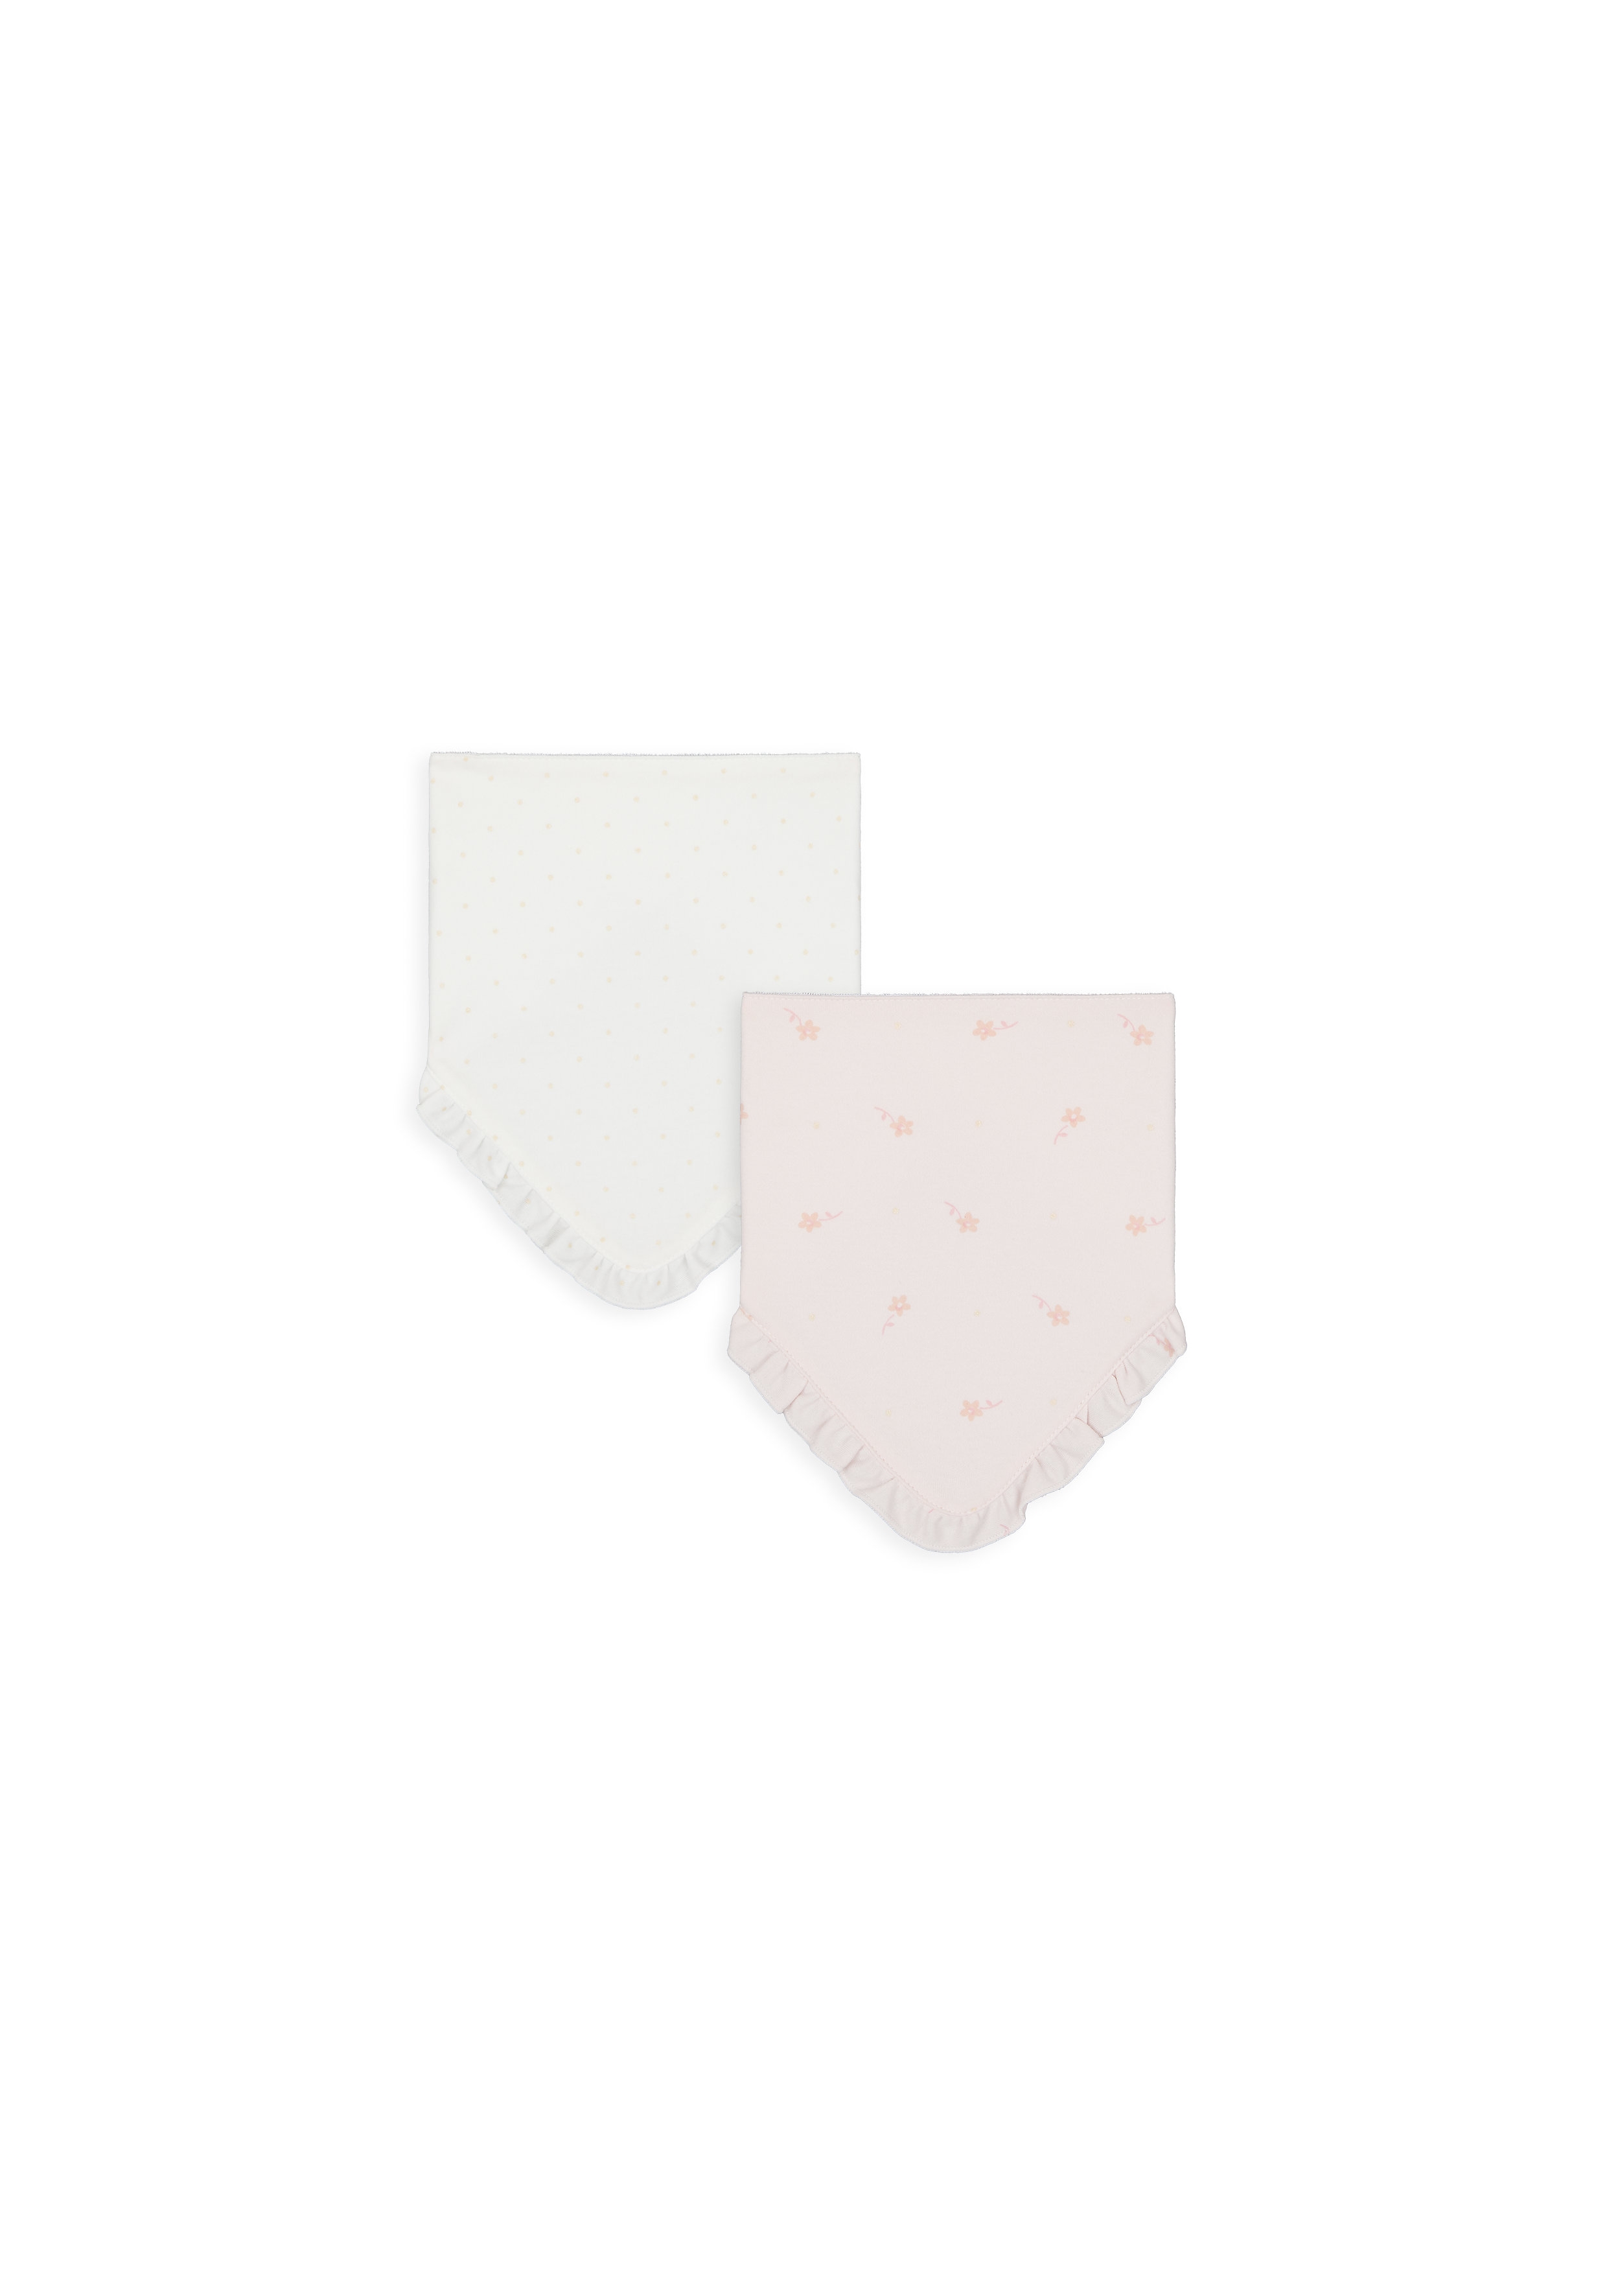 Mothercare Pretty Floral Dribbler Bibs Pink Pack of 2 